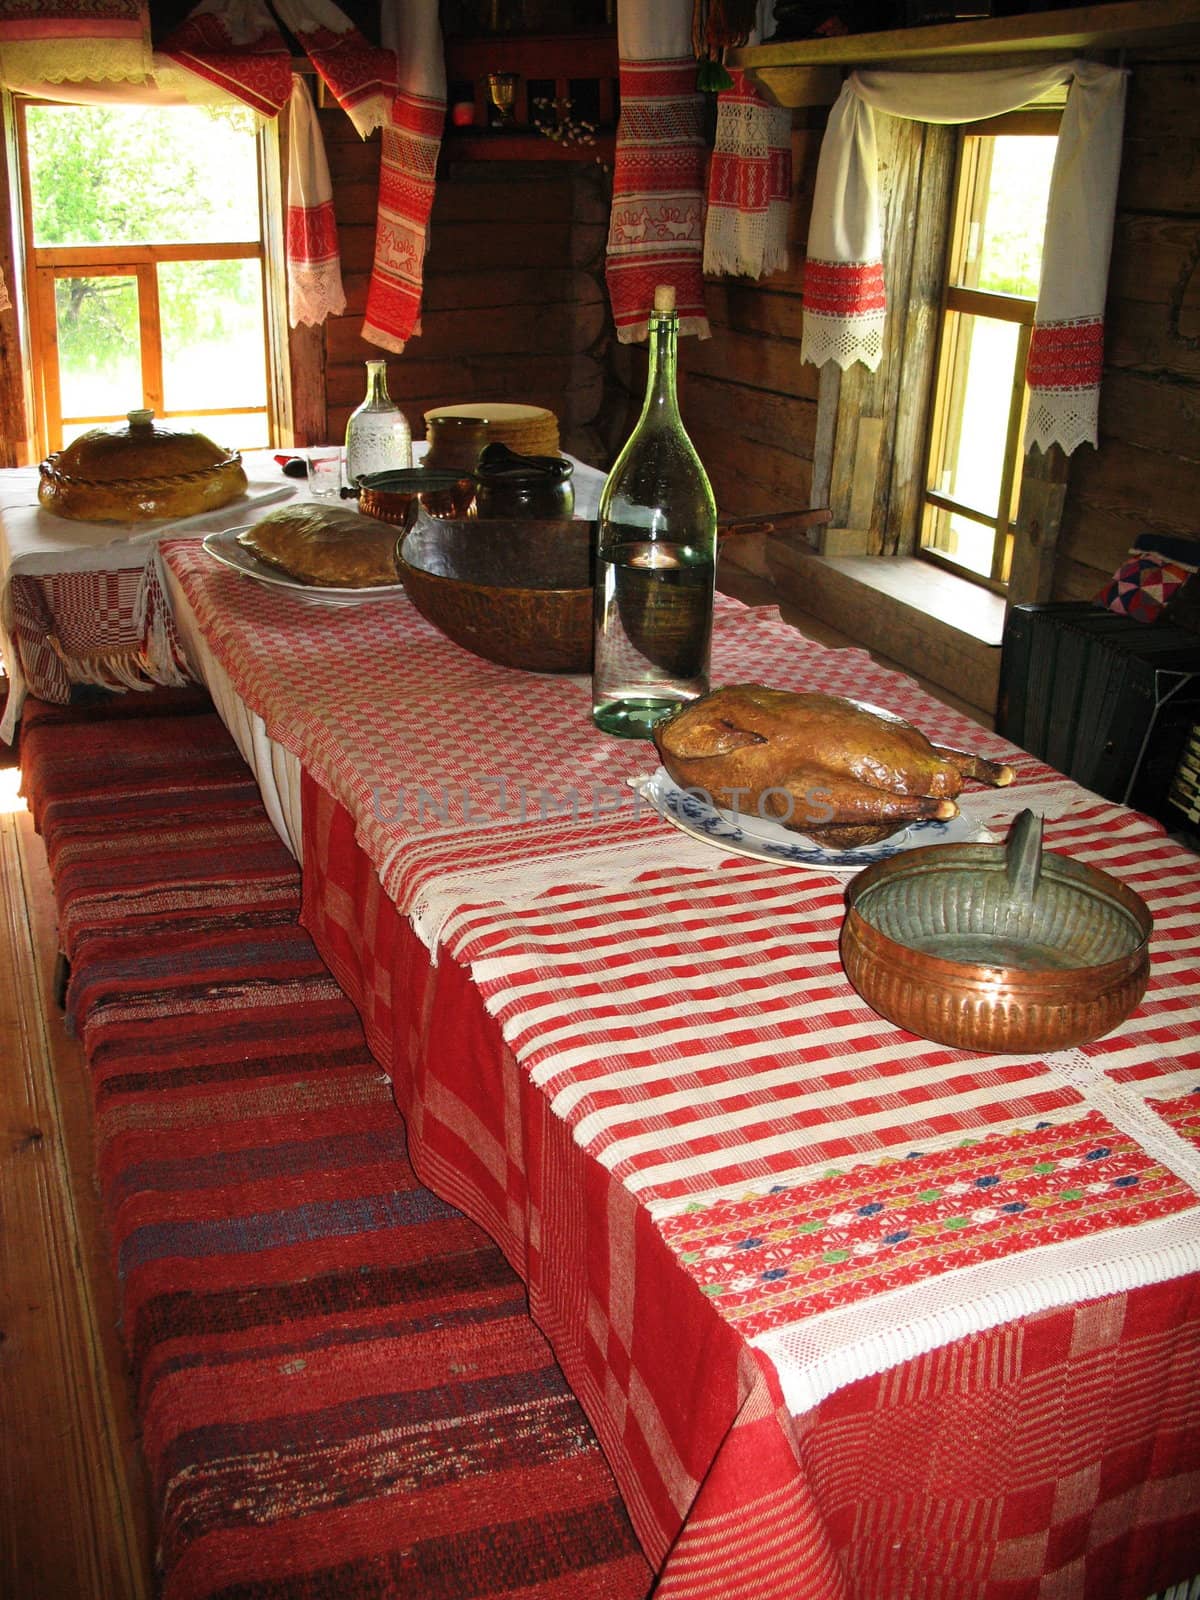 Ancient dinner room in russian country by Vitamin